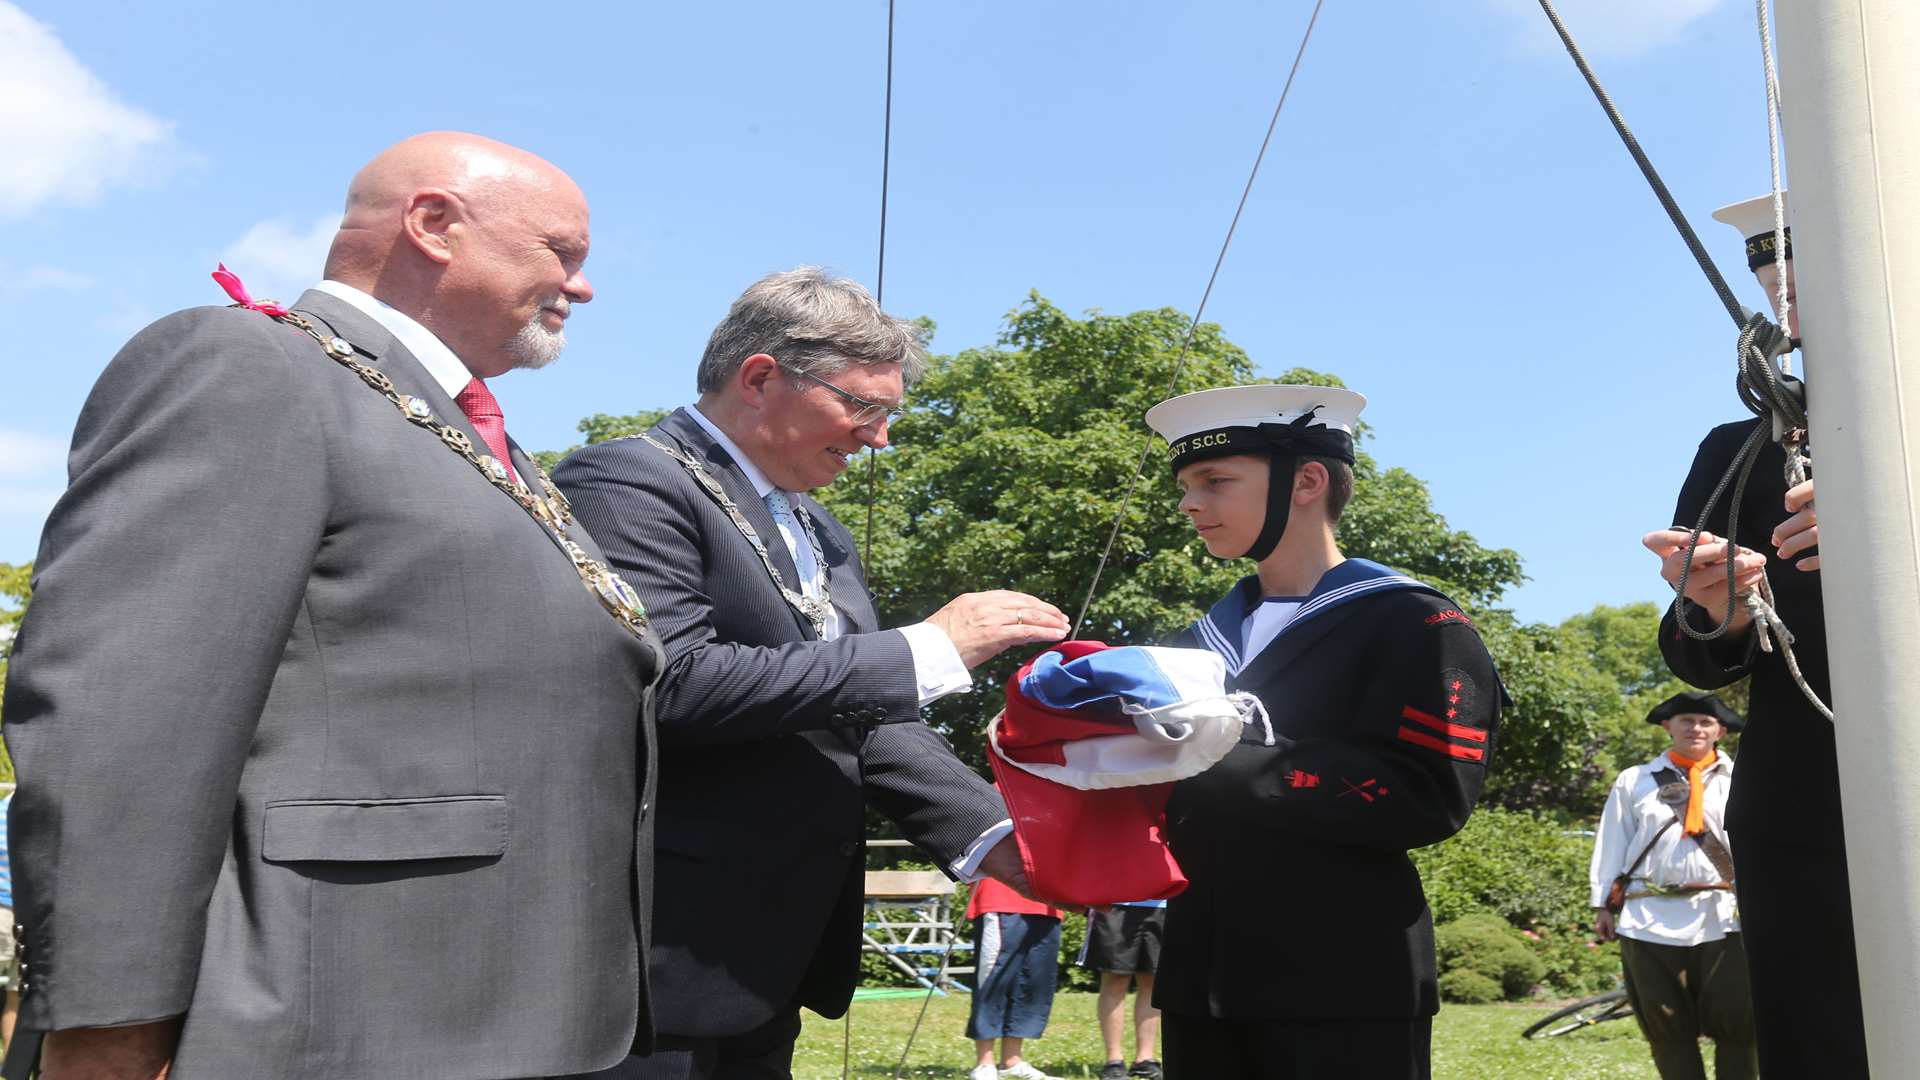 Mayor of Queenborough Cllr Mick Constable, left, with Gregor Rensen, Mayor of Brielle, receives the Dutch flag from Sheppey Sea Cadets in an exchange for the Union flag at the 50th anniversary of the official handing back of Queenborough by the Dutch.